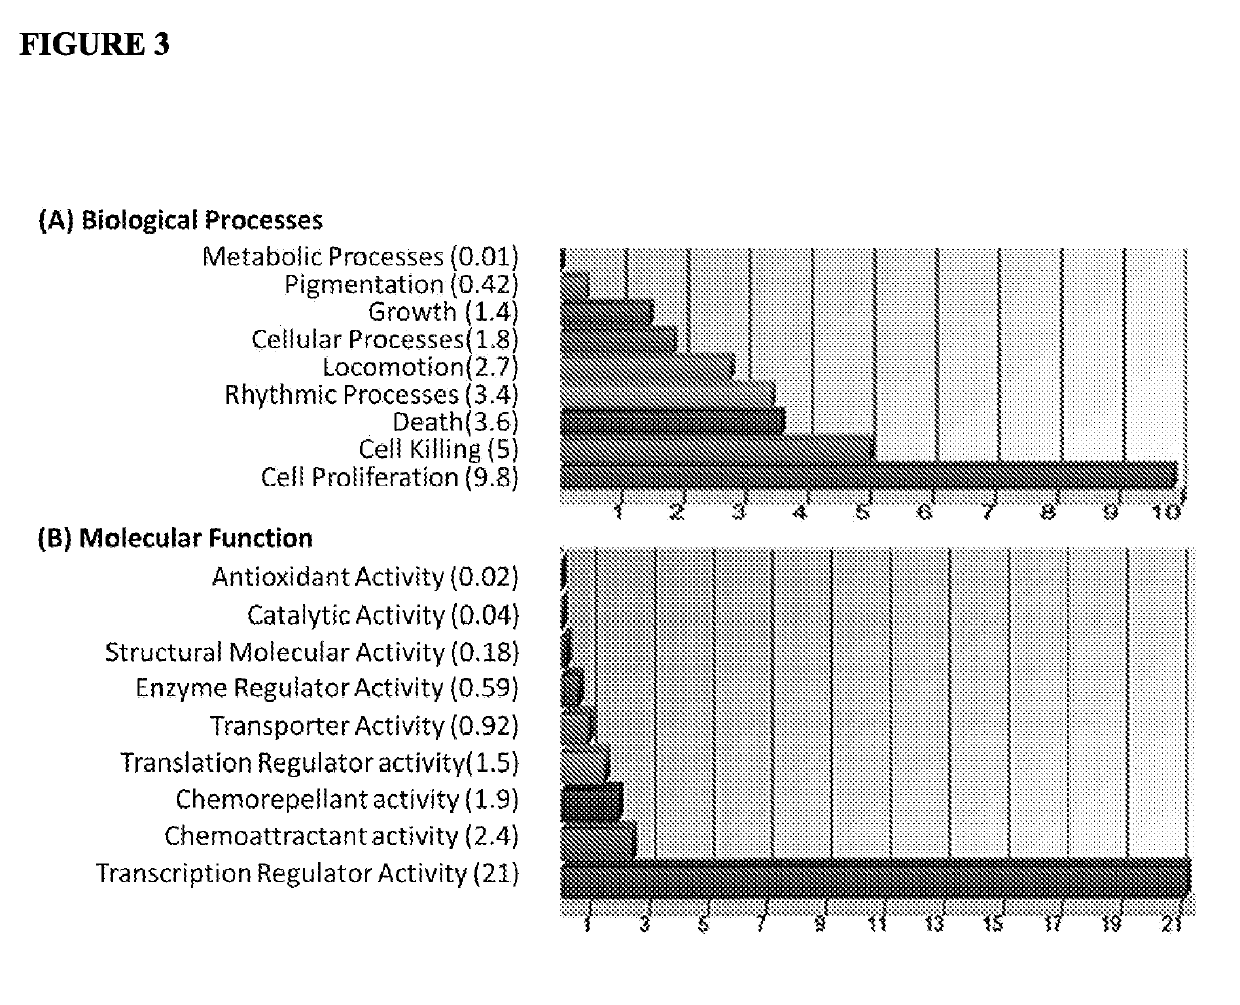 Biomarkers of Oral, Pharyngeal and Laryngeal Cancers